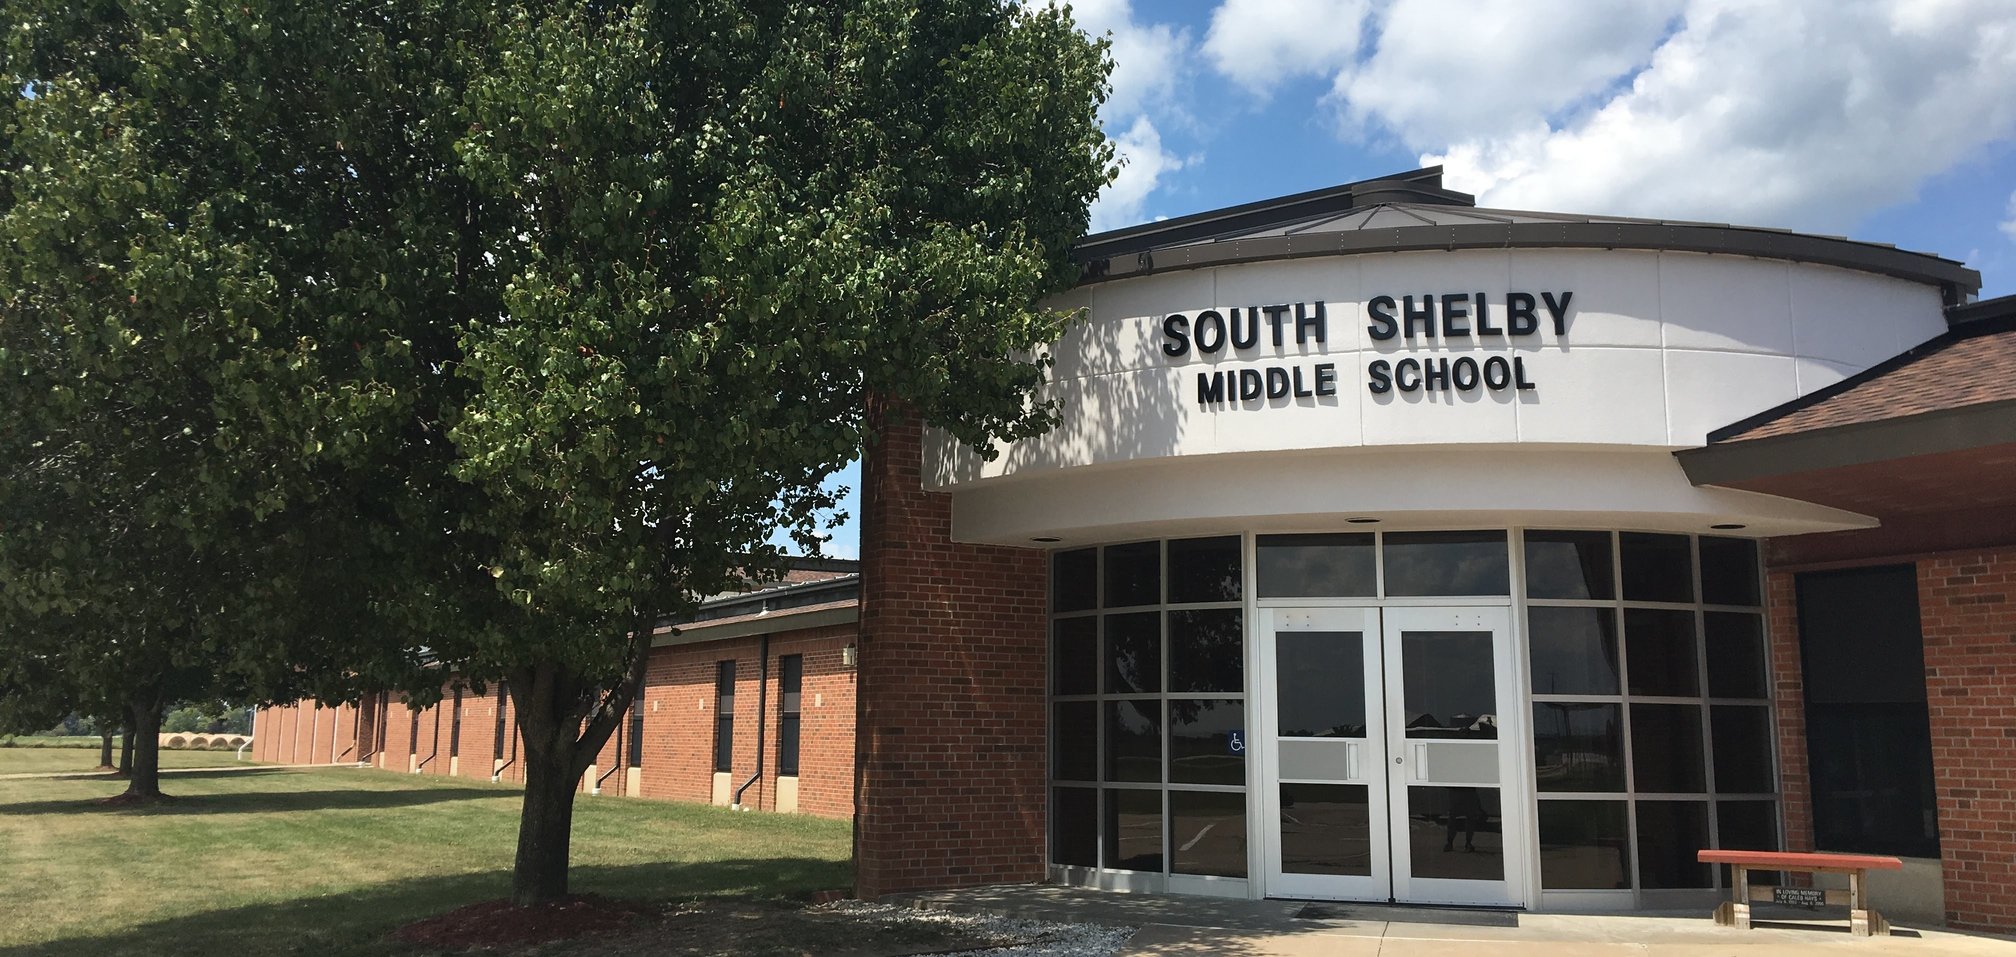 South Shelby Middle School